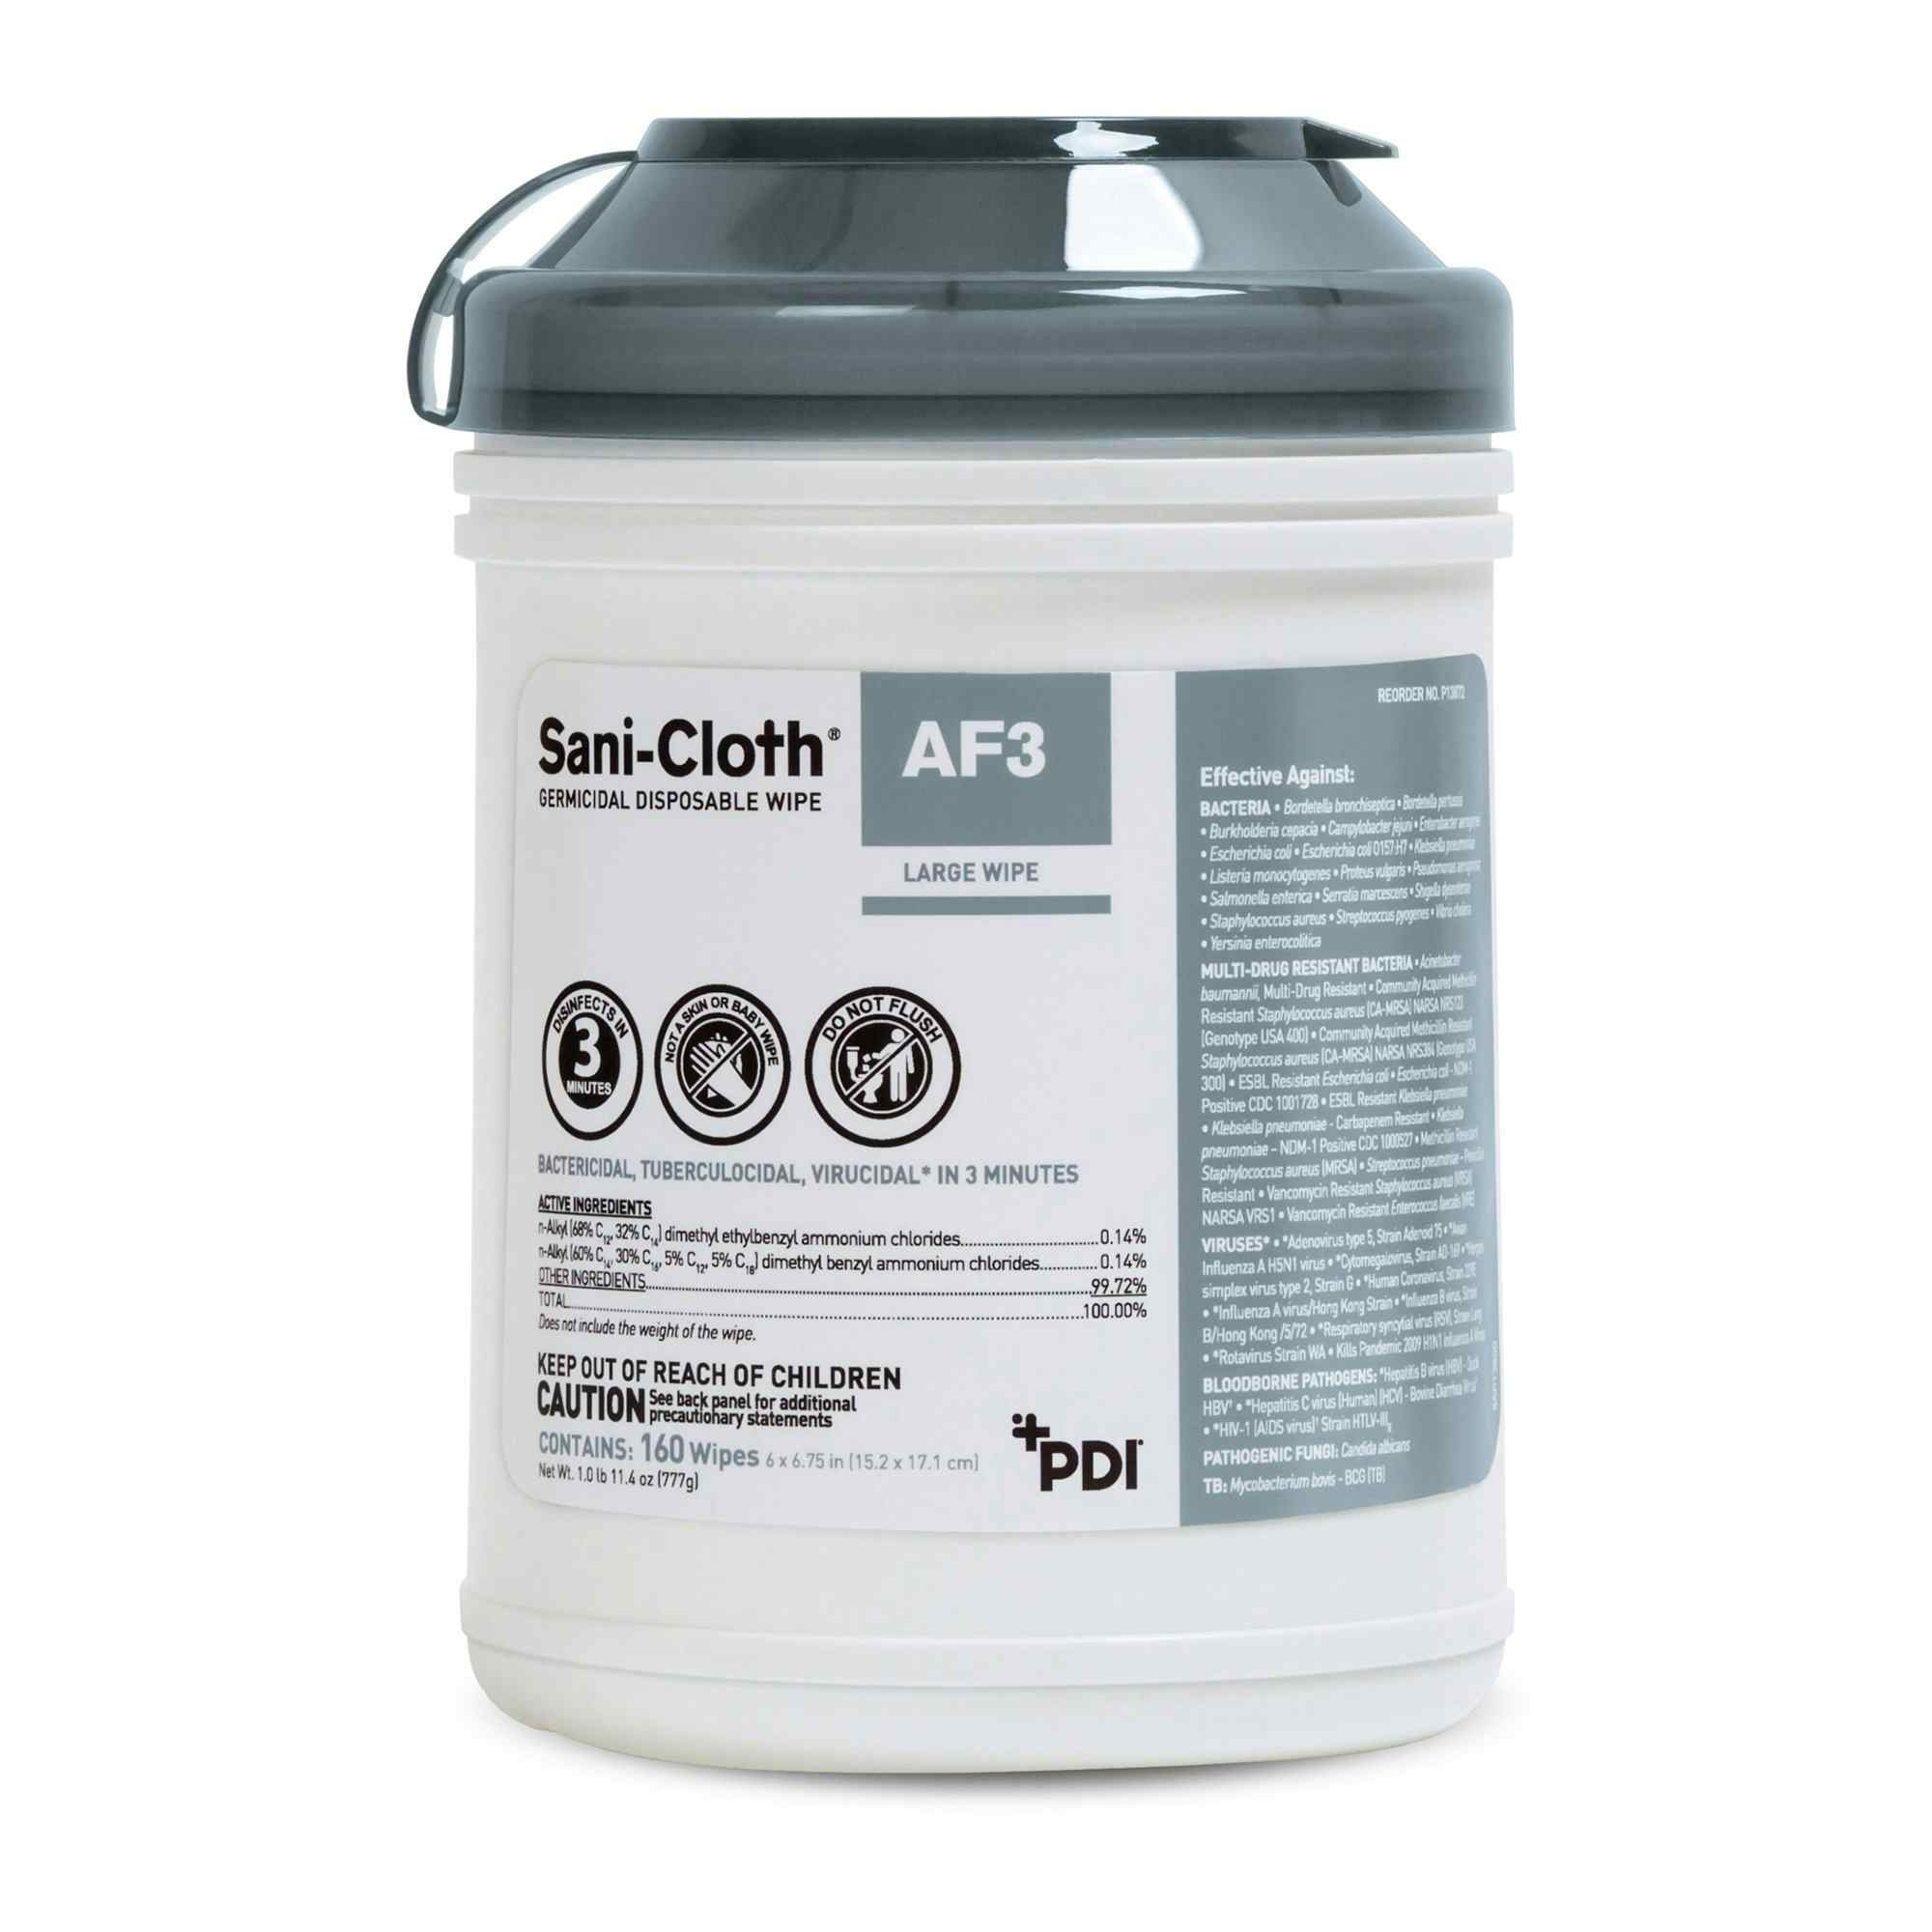 Sani-Cloth AF3 Surface Disinfectant Cleaner Wipe, 6 x 6-3/4", Large Canister, P13872, Case of 12